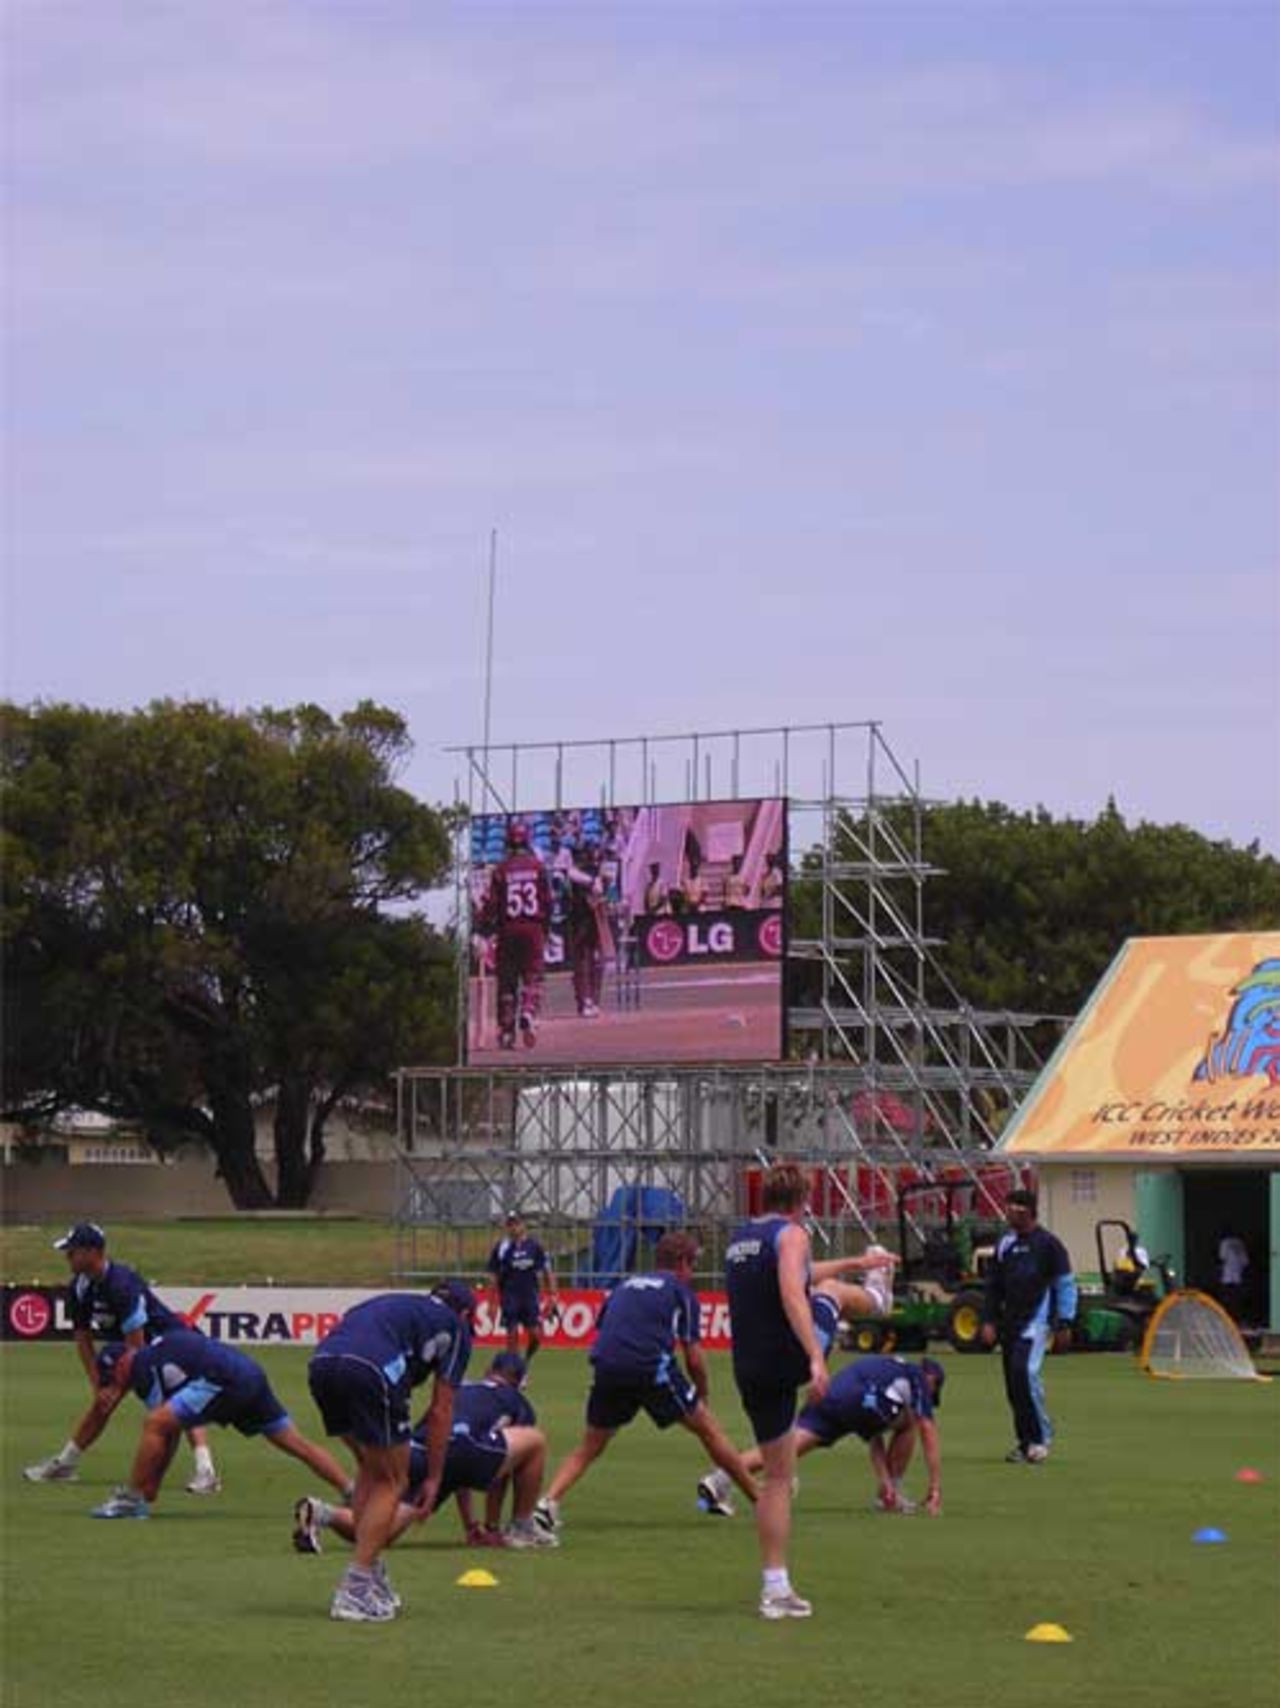 Scotland warm up for the big event in front of the big screen, 2007 World Cup, St Kitts, March 13, 2007 